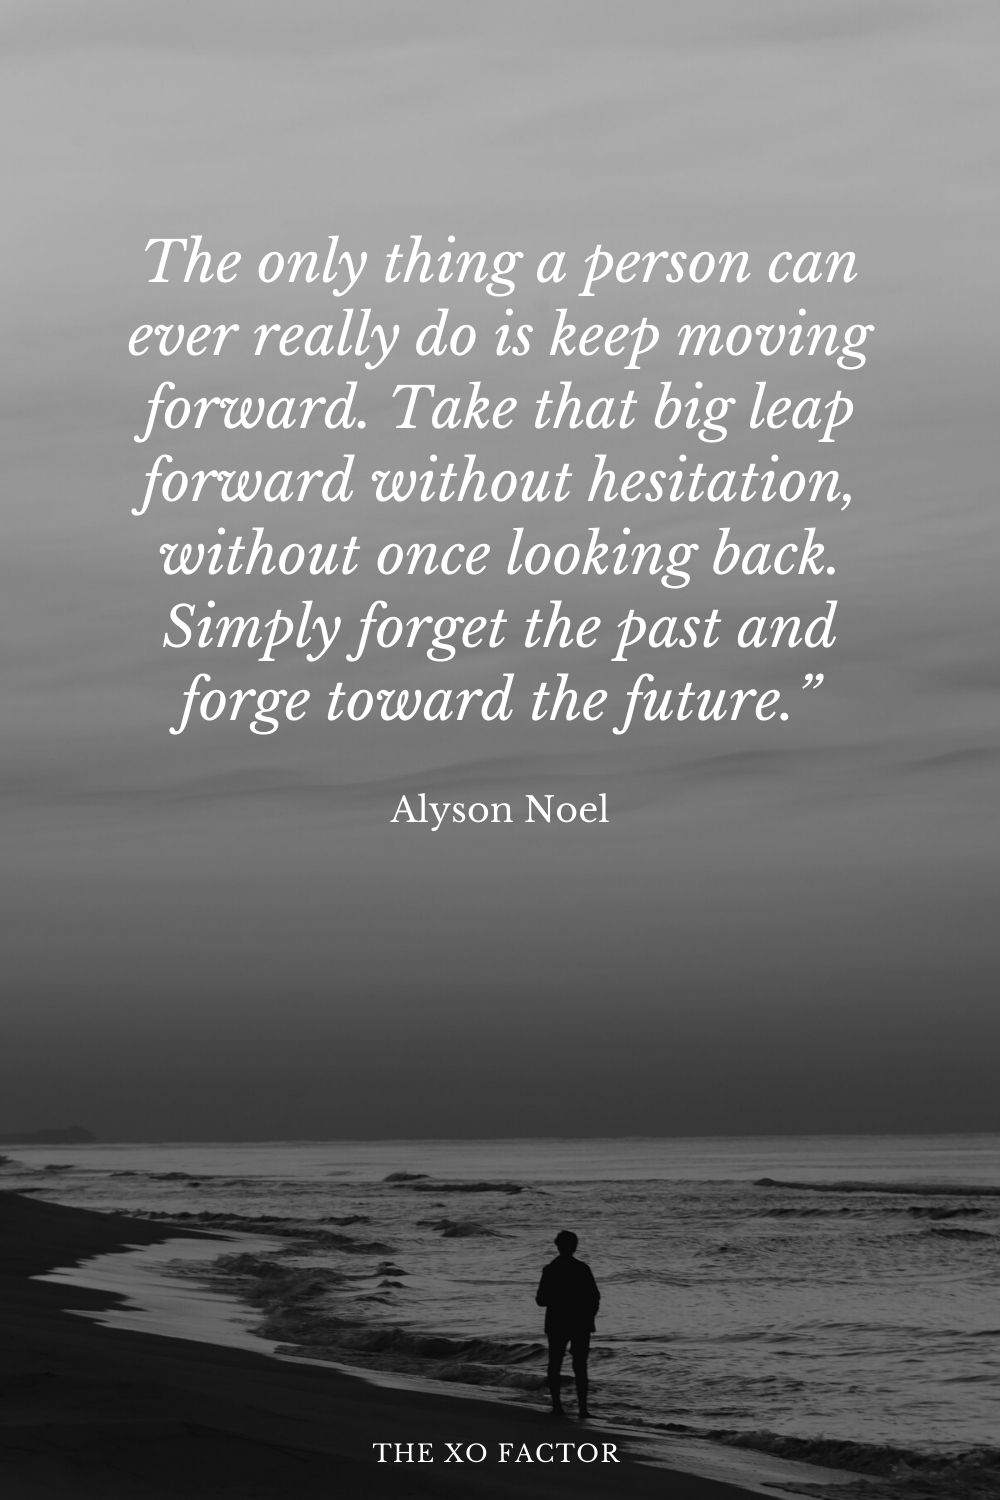 The only thing a person can ever really do is keep moving forward. Take that big leap forward without hesitation, without once looking back. Simply forget the past and forge toward the future.” Alyson Noel